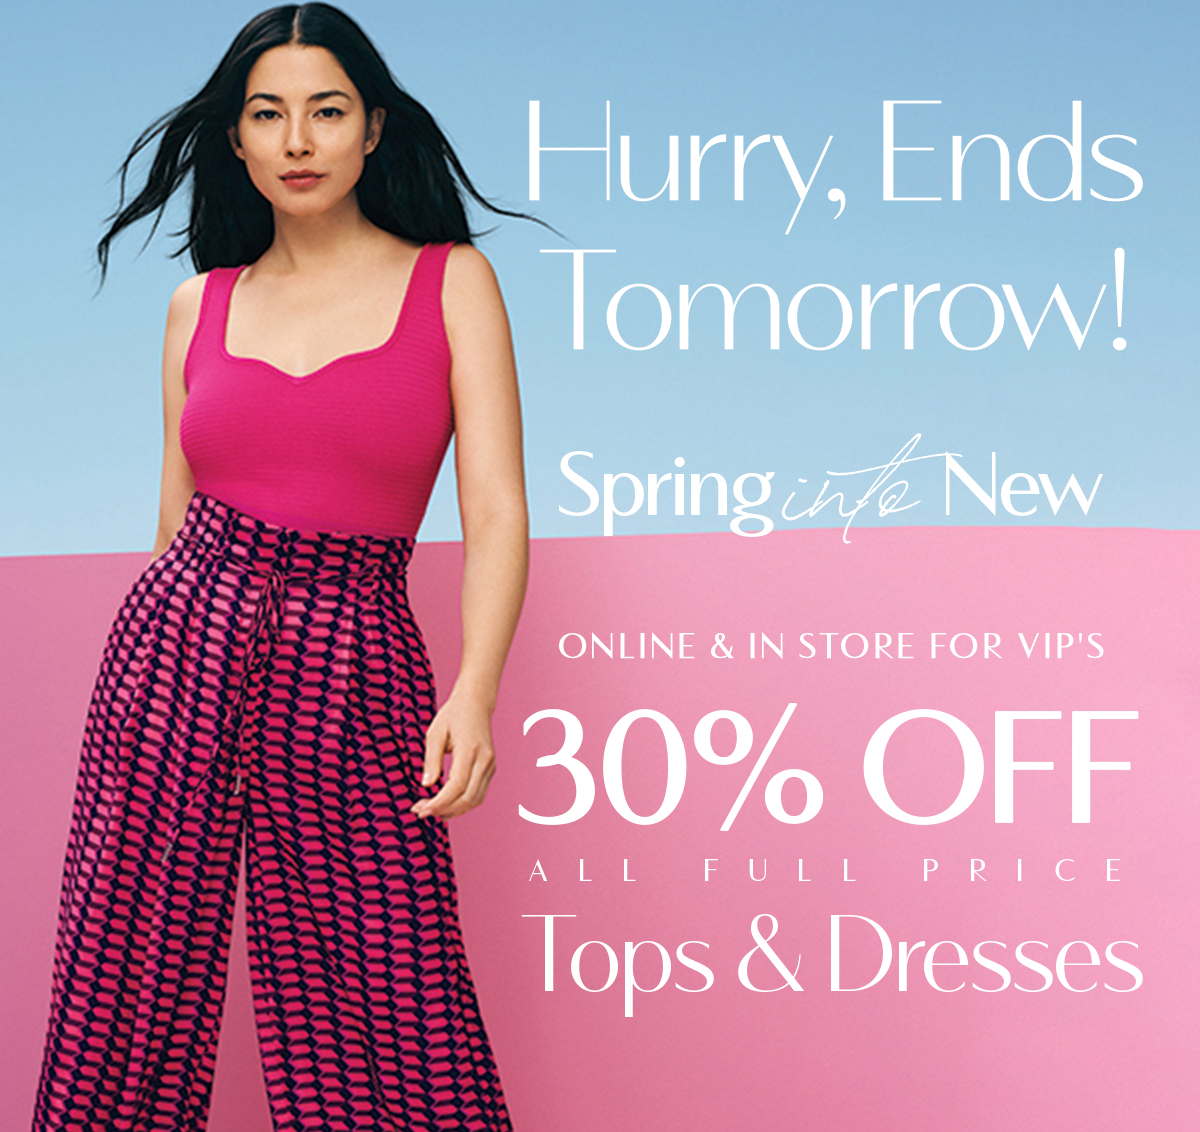 Hurry Ends Tomorrow! Spring Into New. Online & Instore For VIP's. 30%Off All Full Price Tops & Dresses